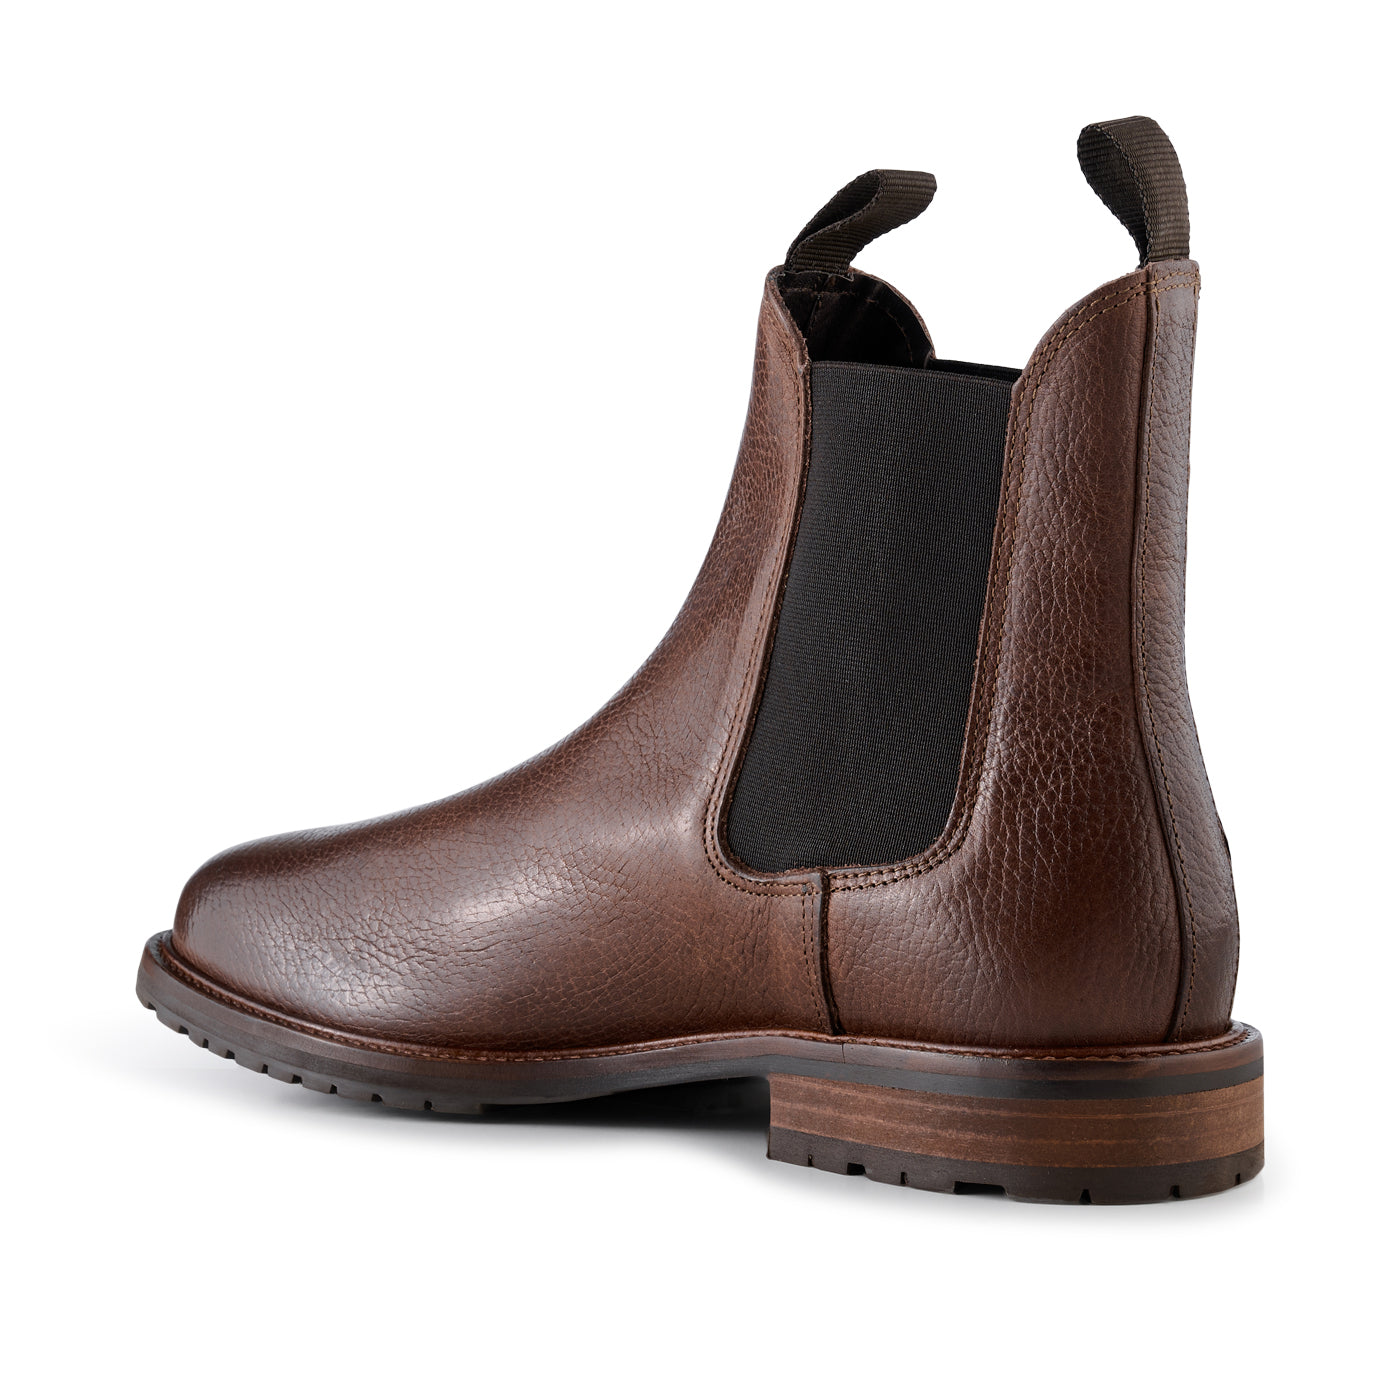 SHOE THE BEAR MENS York chelsea boot leather Boots 130 BROWN